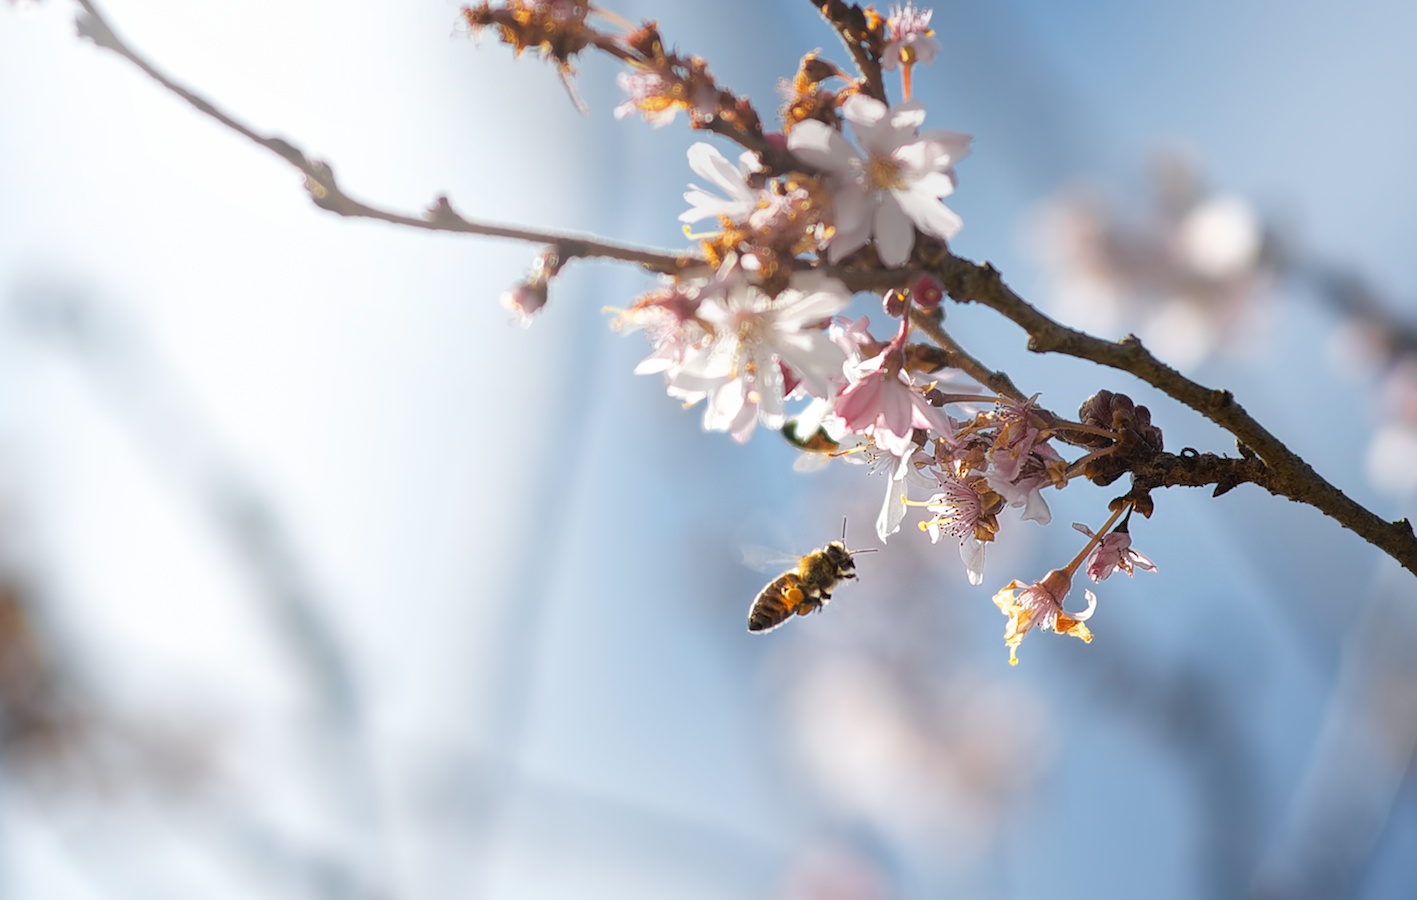 Bee and the Cherry Blossom